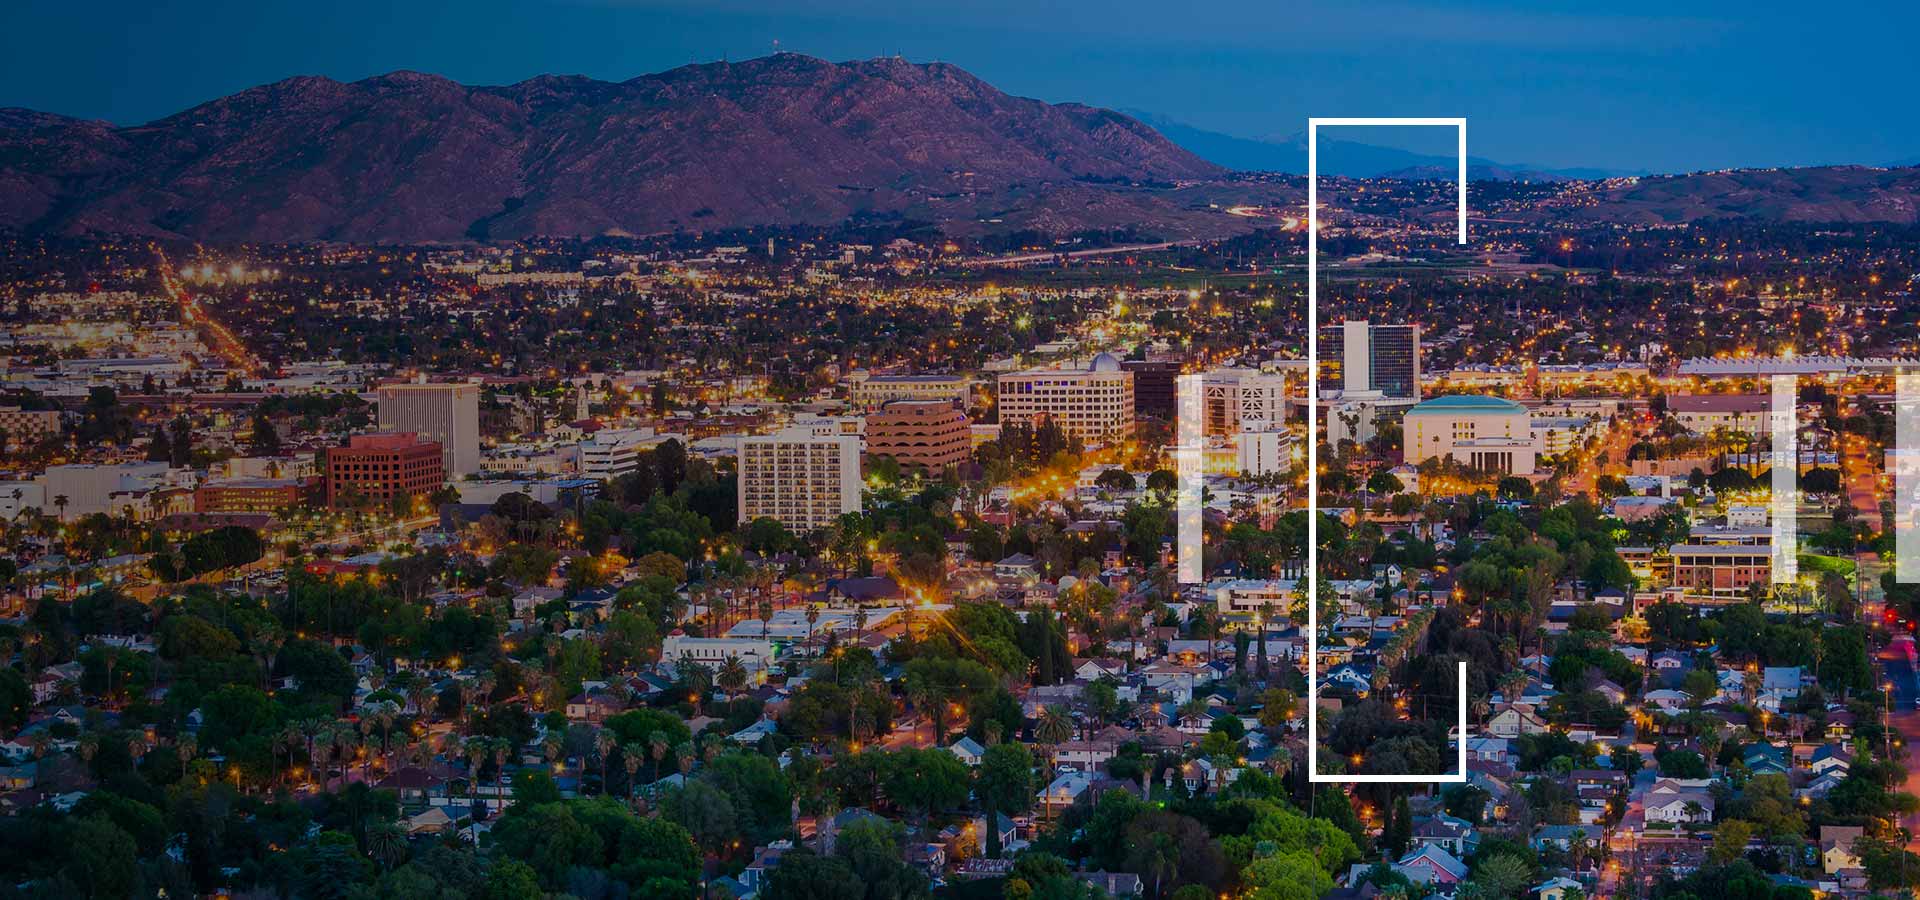 Infosys Public Services Launches Blockchain Network to Modernize Public Recordkeeping for County of Riverside in California